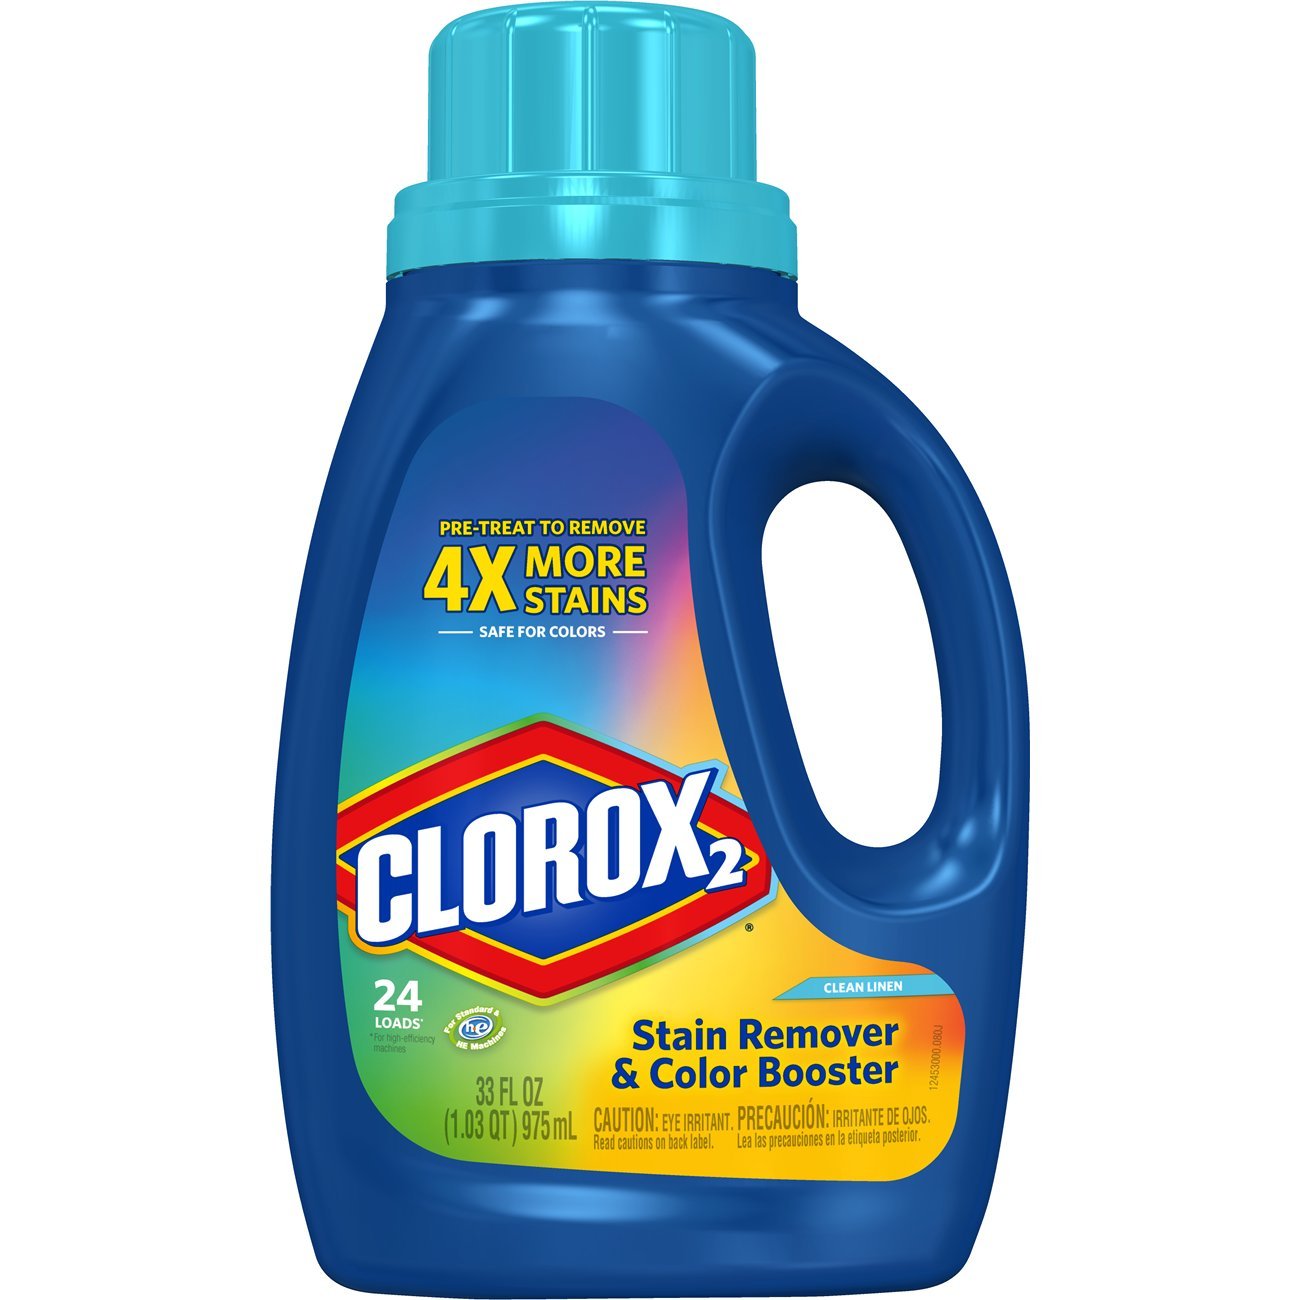 Clorox 2 Laundry Stain Remover and Color Booster, Clean Linen, 33 Ounce Bottle